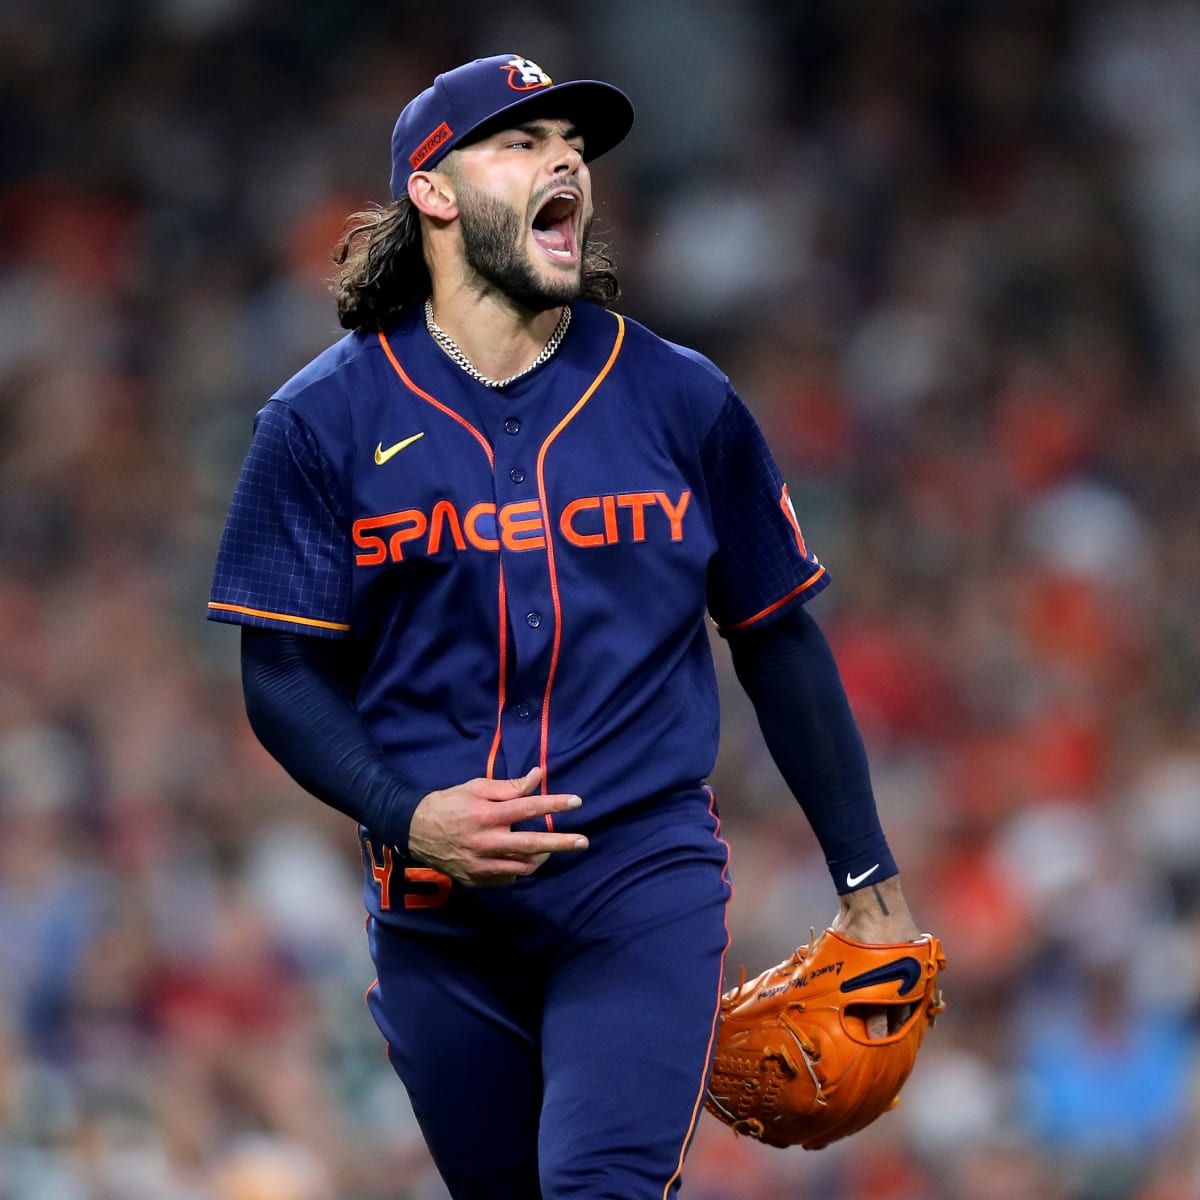 Out Dueled: Houston Astros Drop Series Opener to Philadelphia